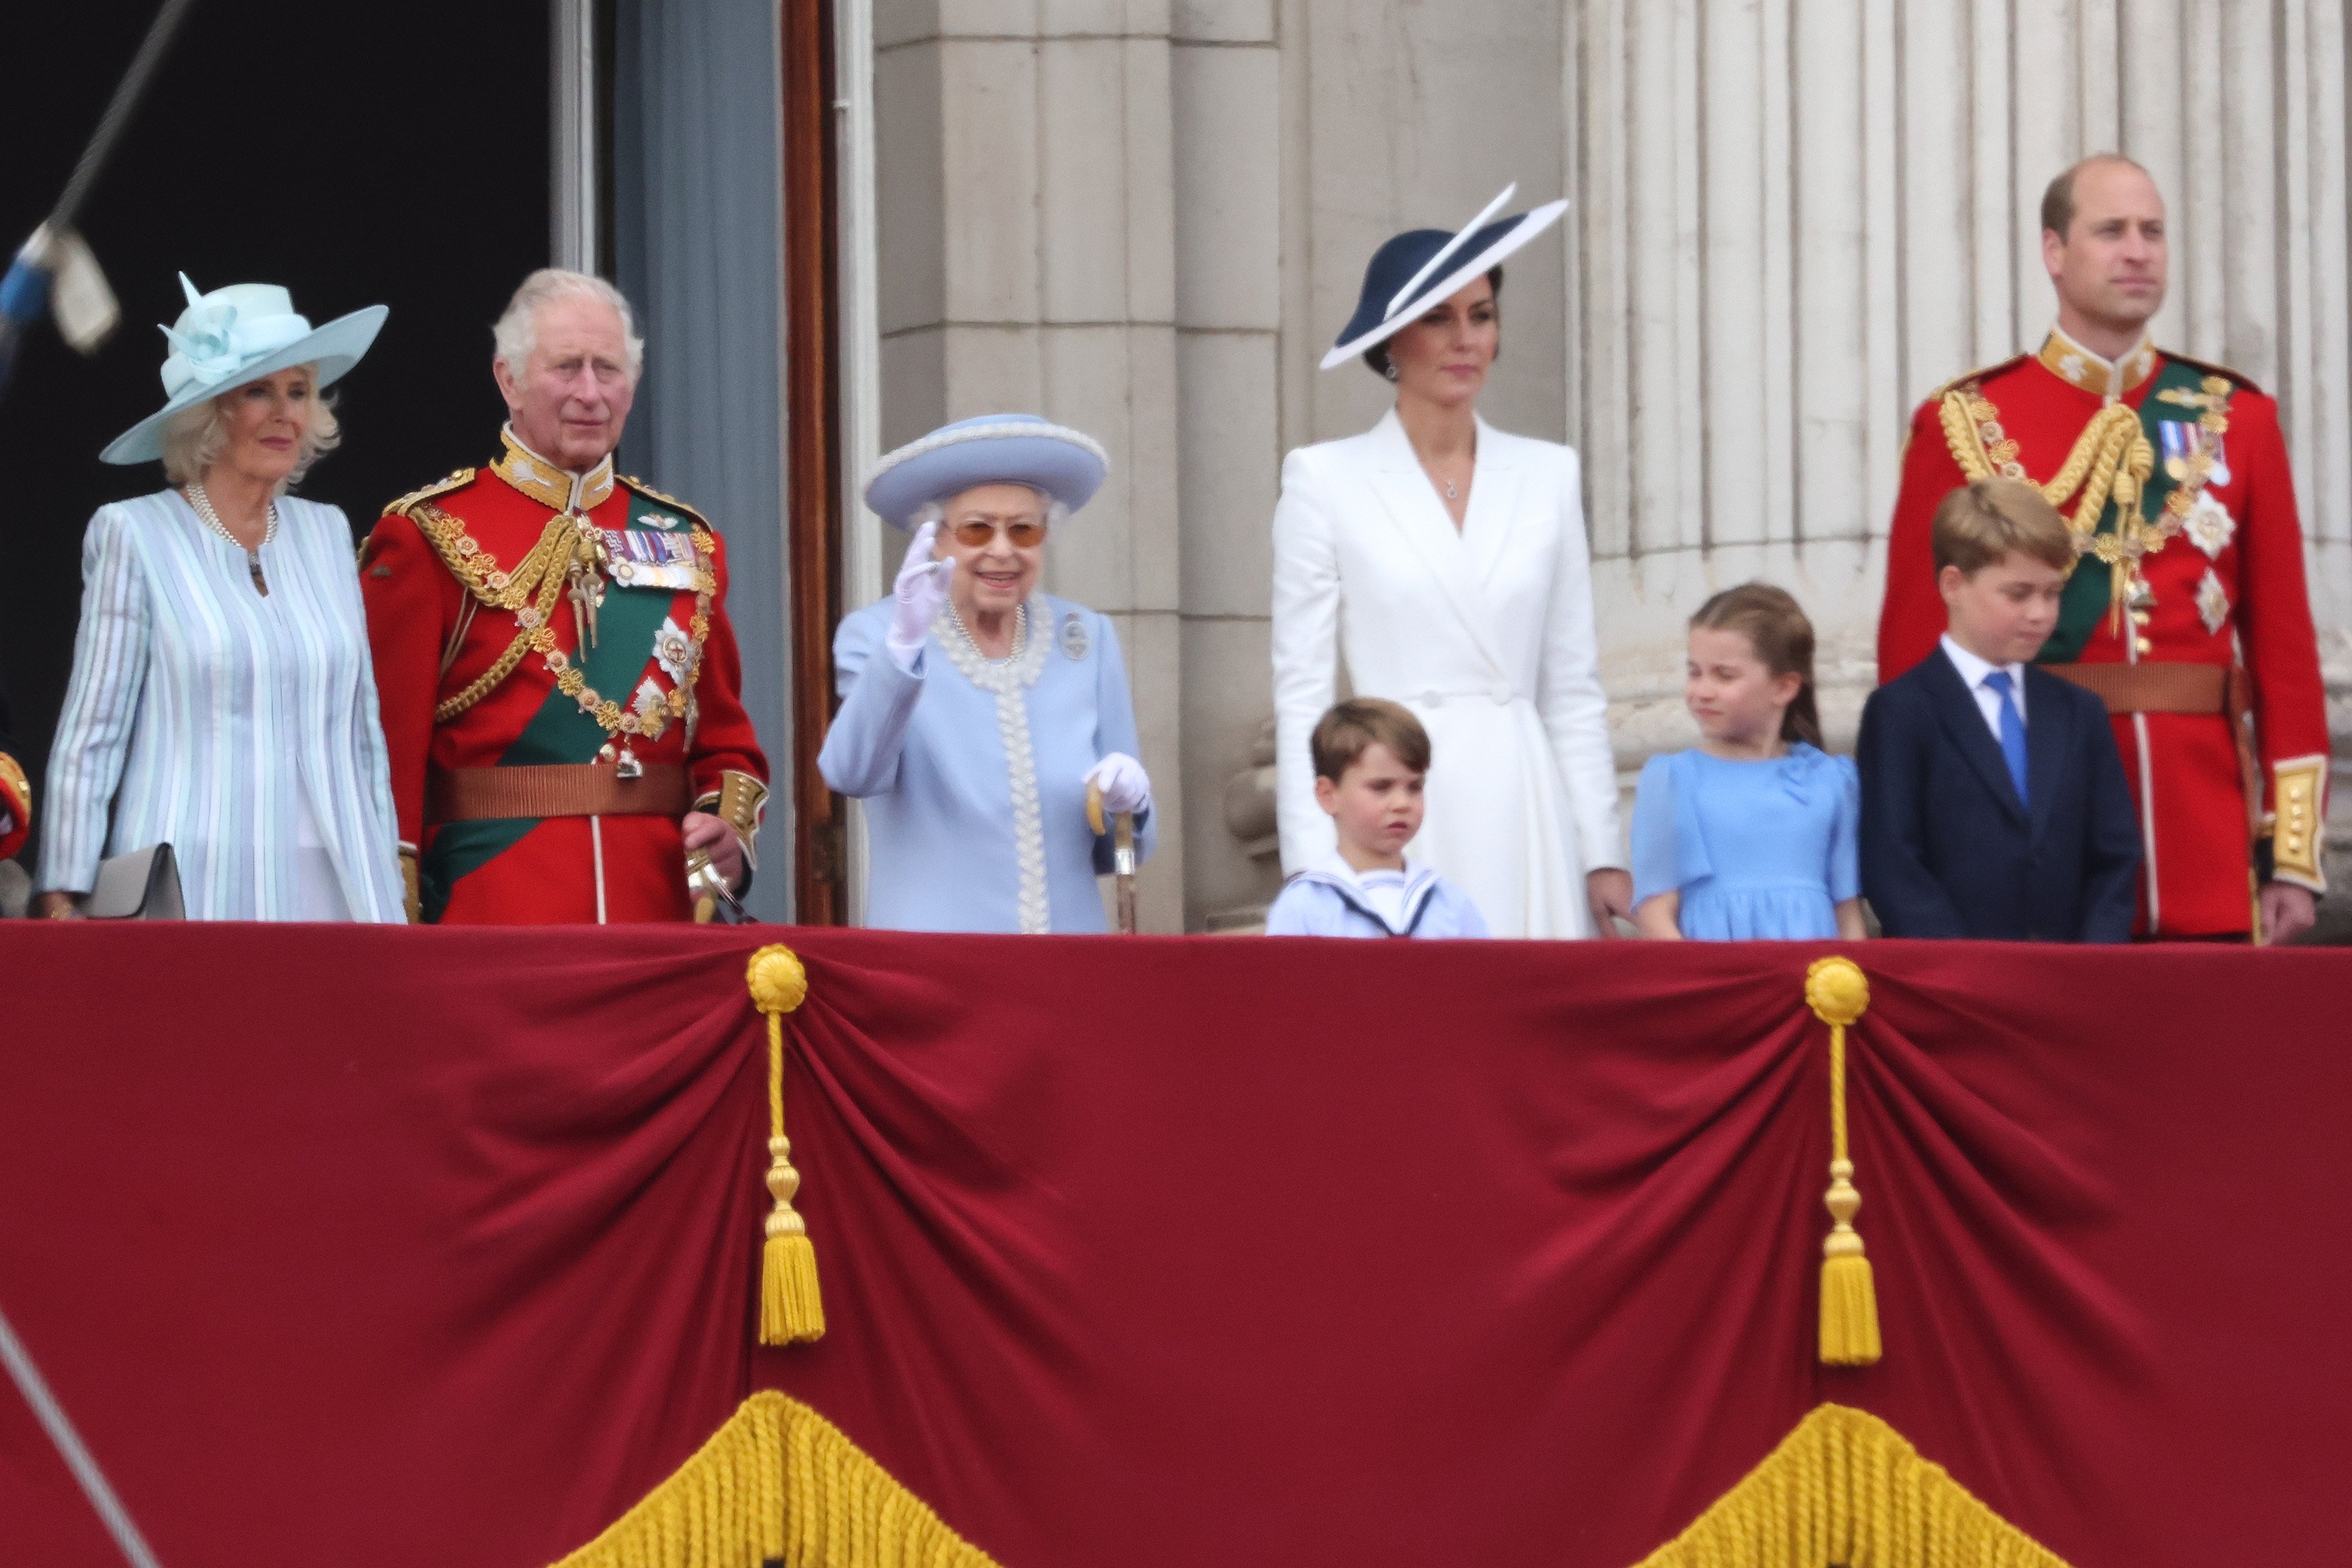 Queen Consort Camilla, King Charles III, Queen Elizabeth II, Prince William, Kate Middleton with their children George, Charlotte and Louis at Buckingham Palace in 2022. | Source: Getty Images 